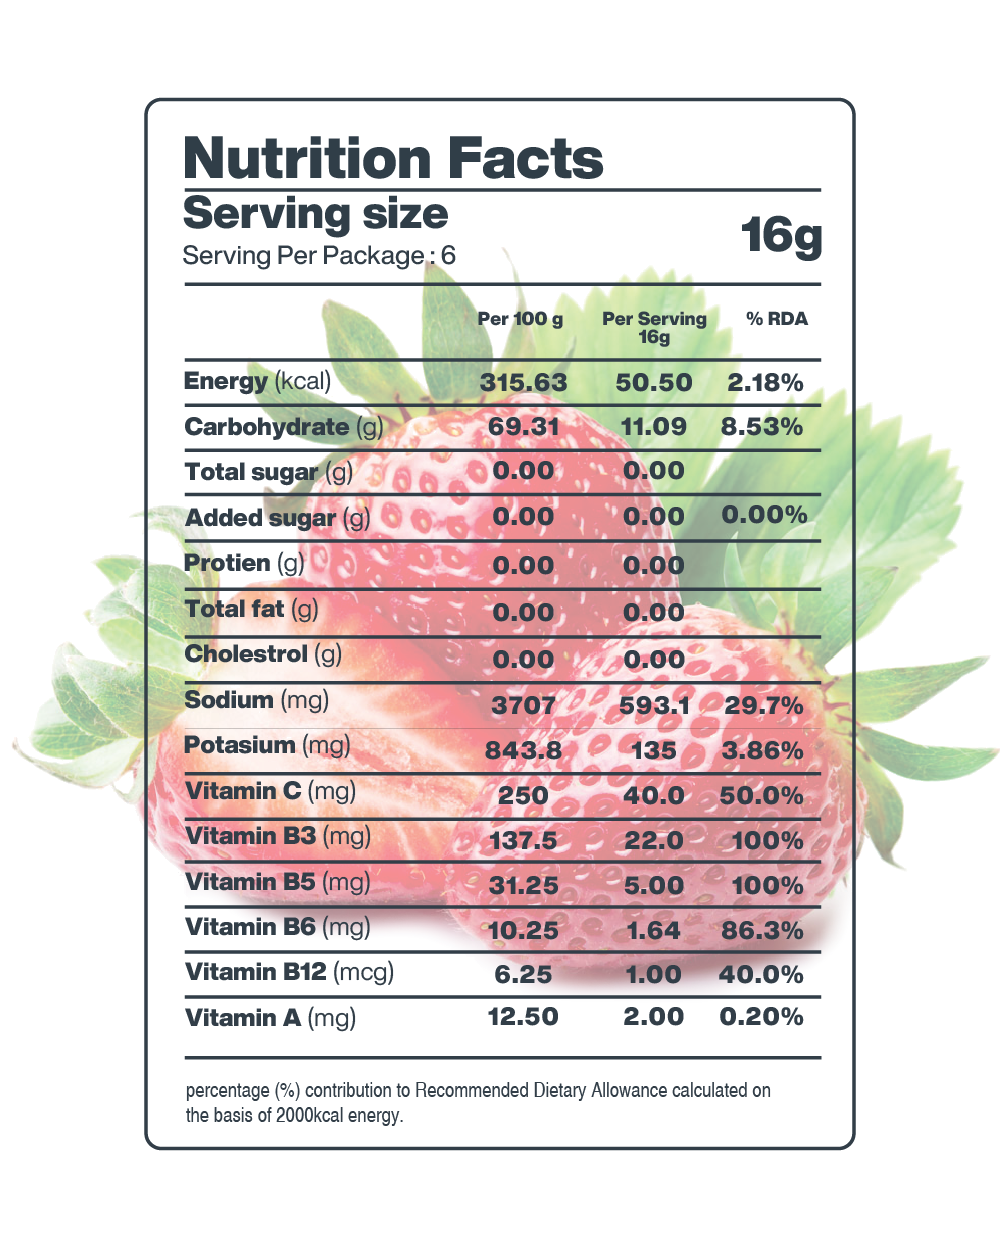 Nutrition Facts label for Moon Lunar Strawberry Hydration Stick Pack of 2 by MOONFREEZE FOODS PRIVATE LIMITED, showing values per 100g and per 16g serving. Key nutrients listed include energy, carbohydrates, sugars, protein, fat, fiber, and various vitamins and minerals. Discover the benefits of this Vitamin-Enriched product that serves as a Strawberry Hydration Booster.